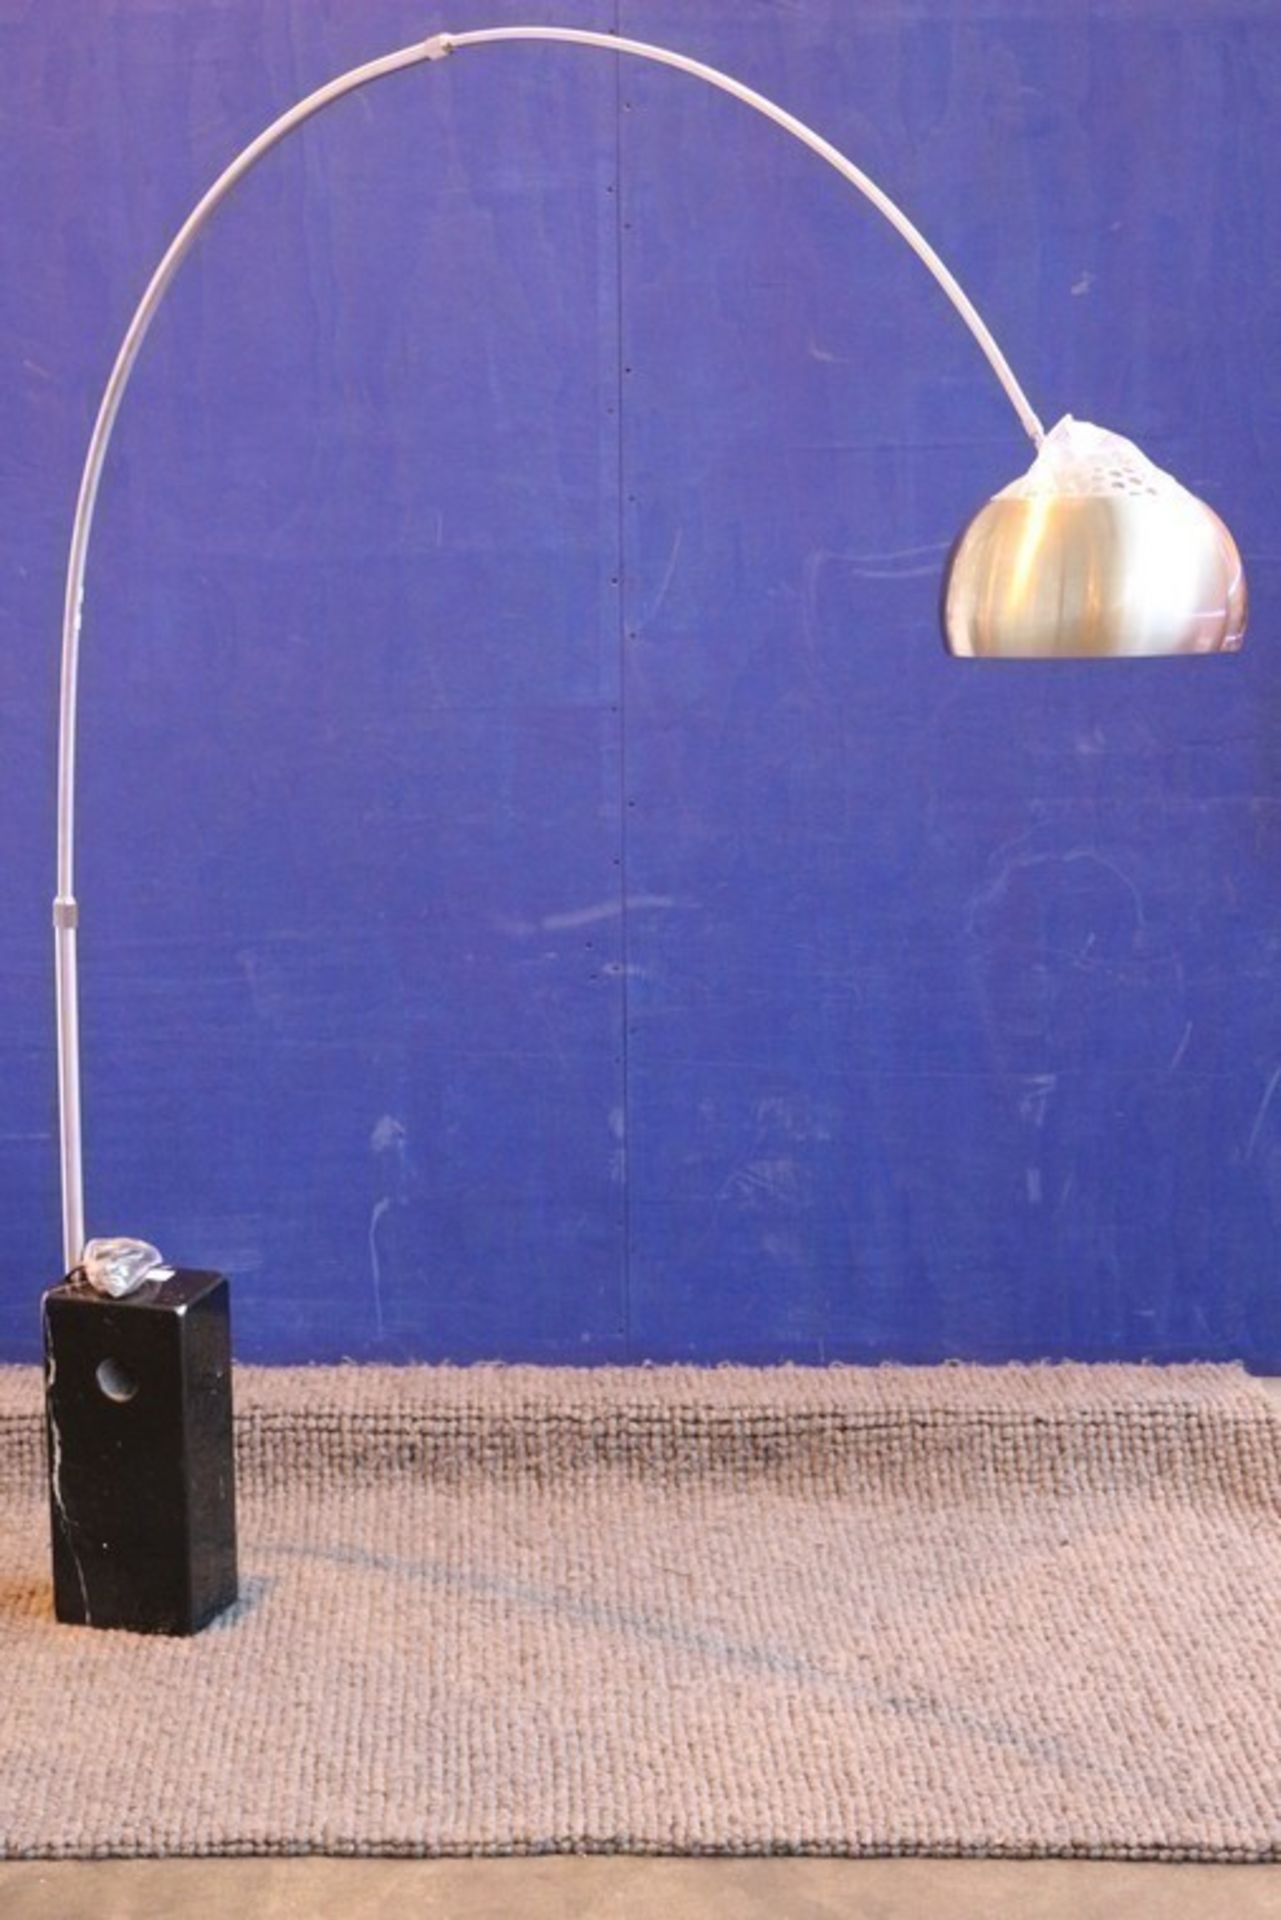 1 x MARBLE AND STAINLESS STEEL BRAND NEW ROMAN CONRAD COLLECTION LARGE ARCHED FLOOR LAMP (0164-L) *